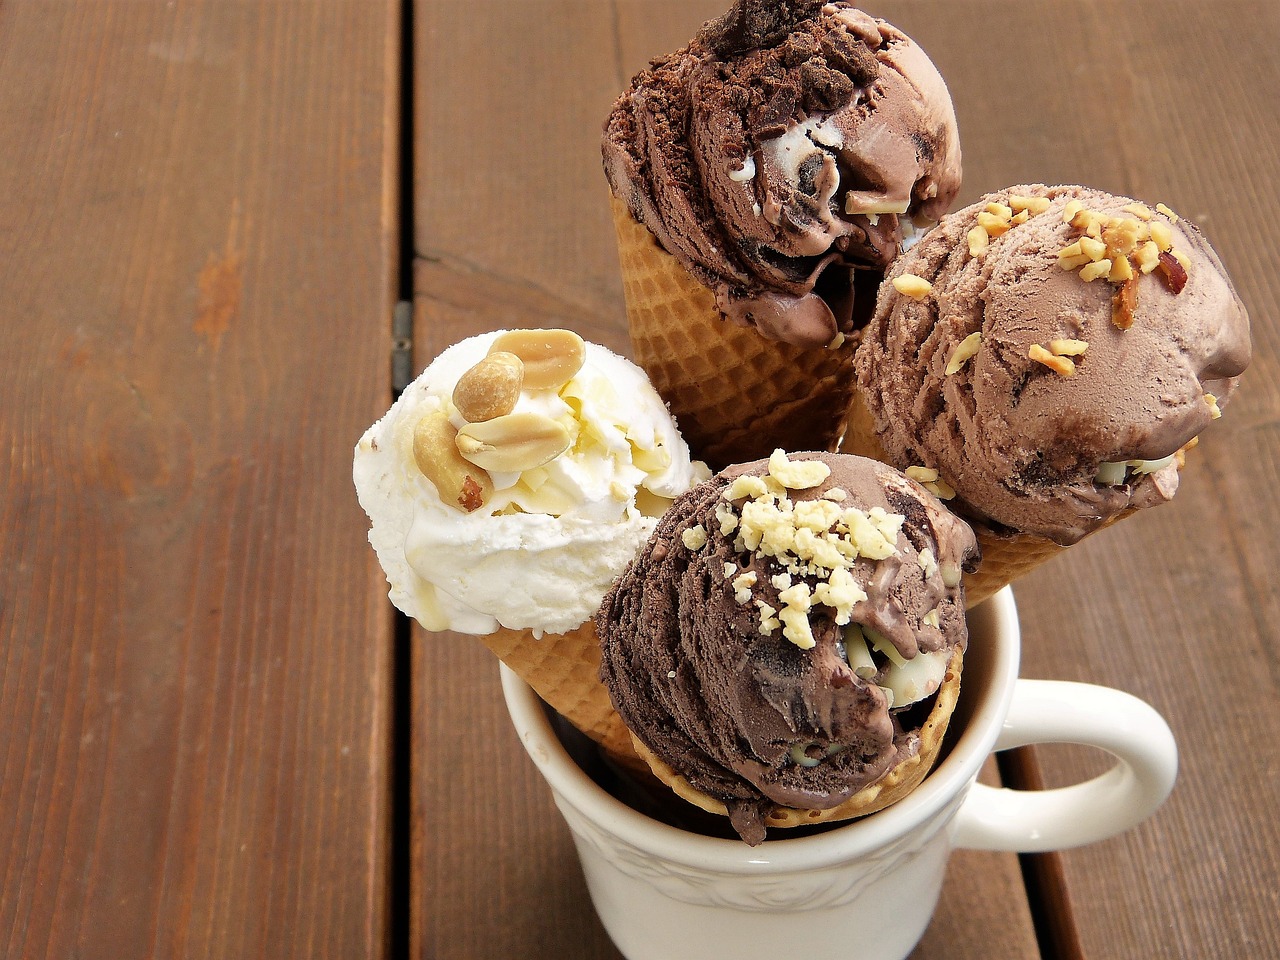 Our guide to decoding ice cream scoop-shop menus